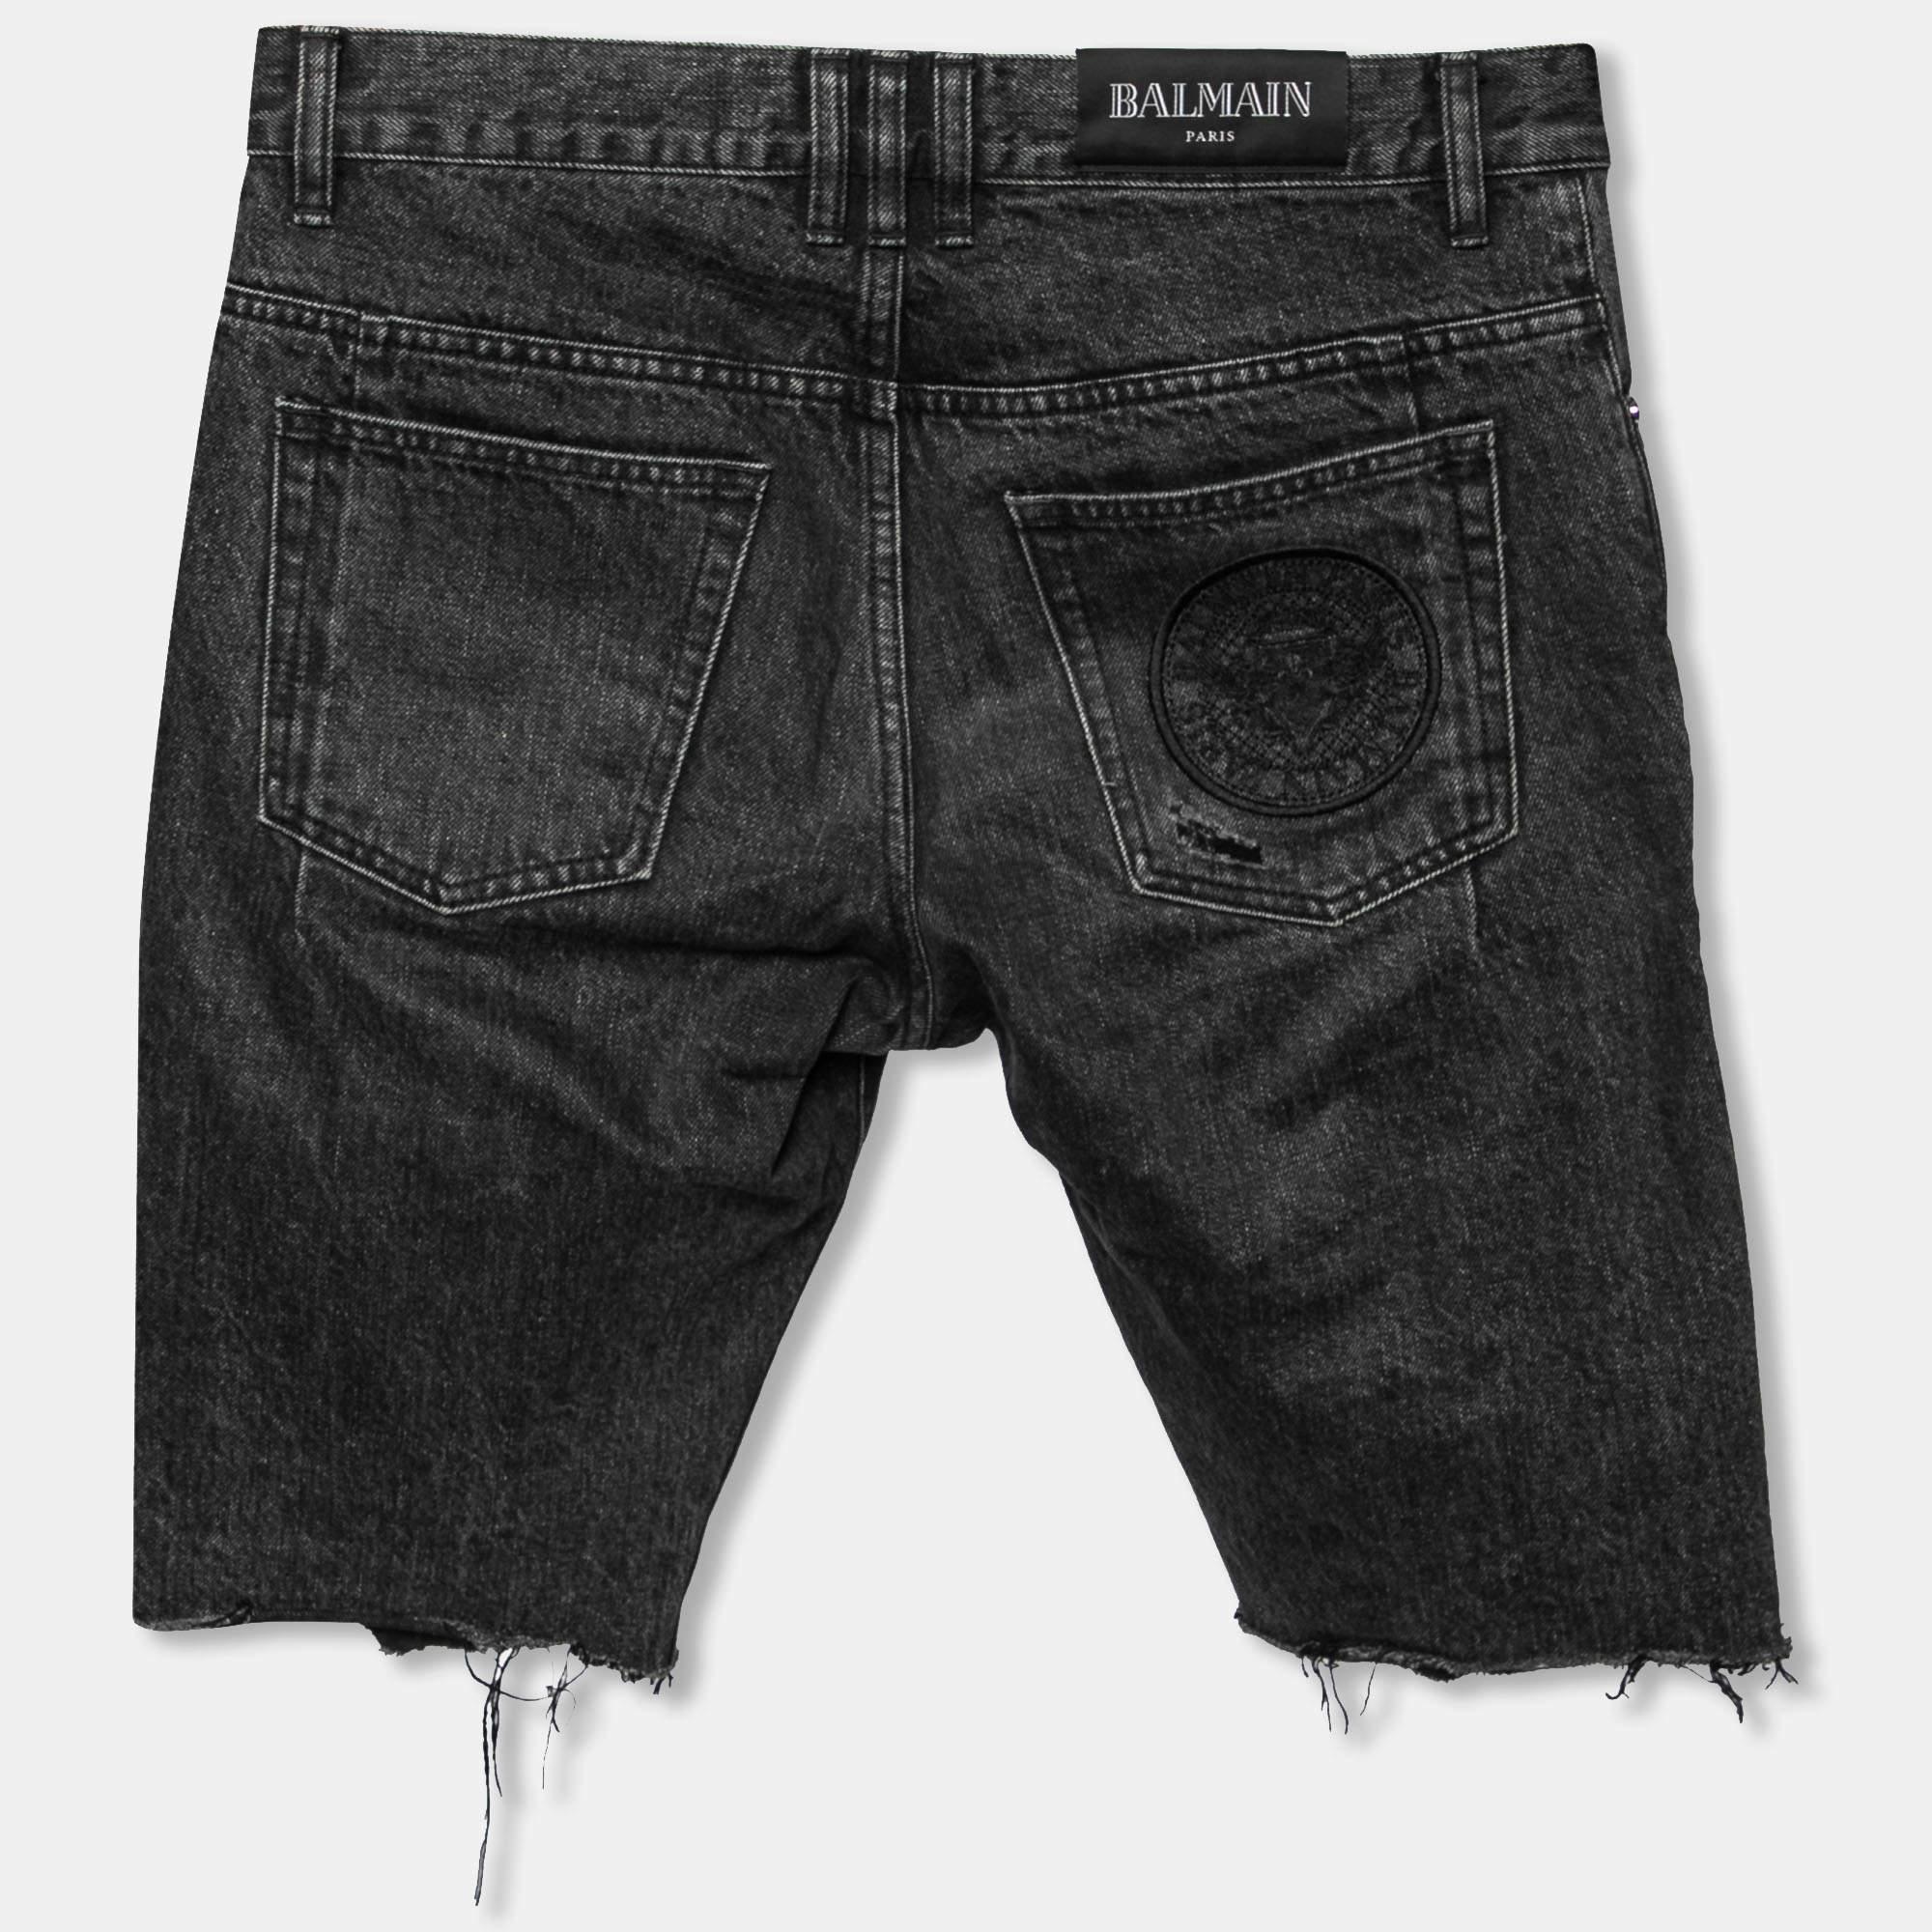 Spend the day comfortably in these shorts from the House of Balmain. They are tailored from grey distressed denim fabric and feature buttoned closure and six external pockets. These Balmain shorts make a great pick for your vacations.

